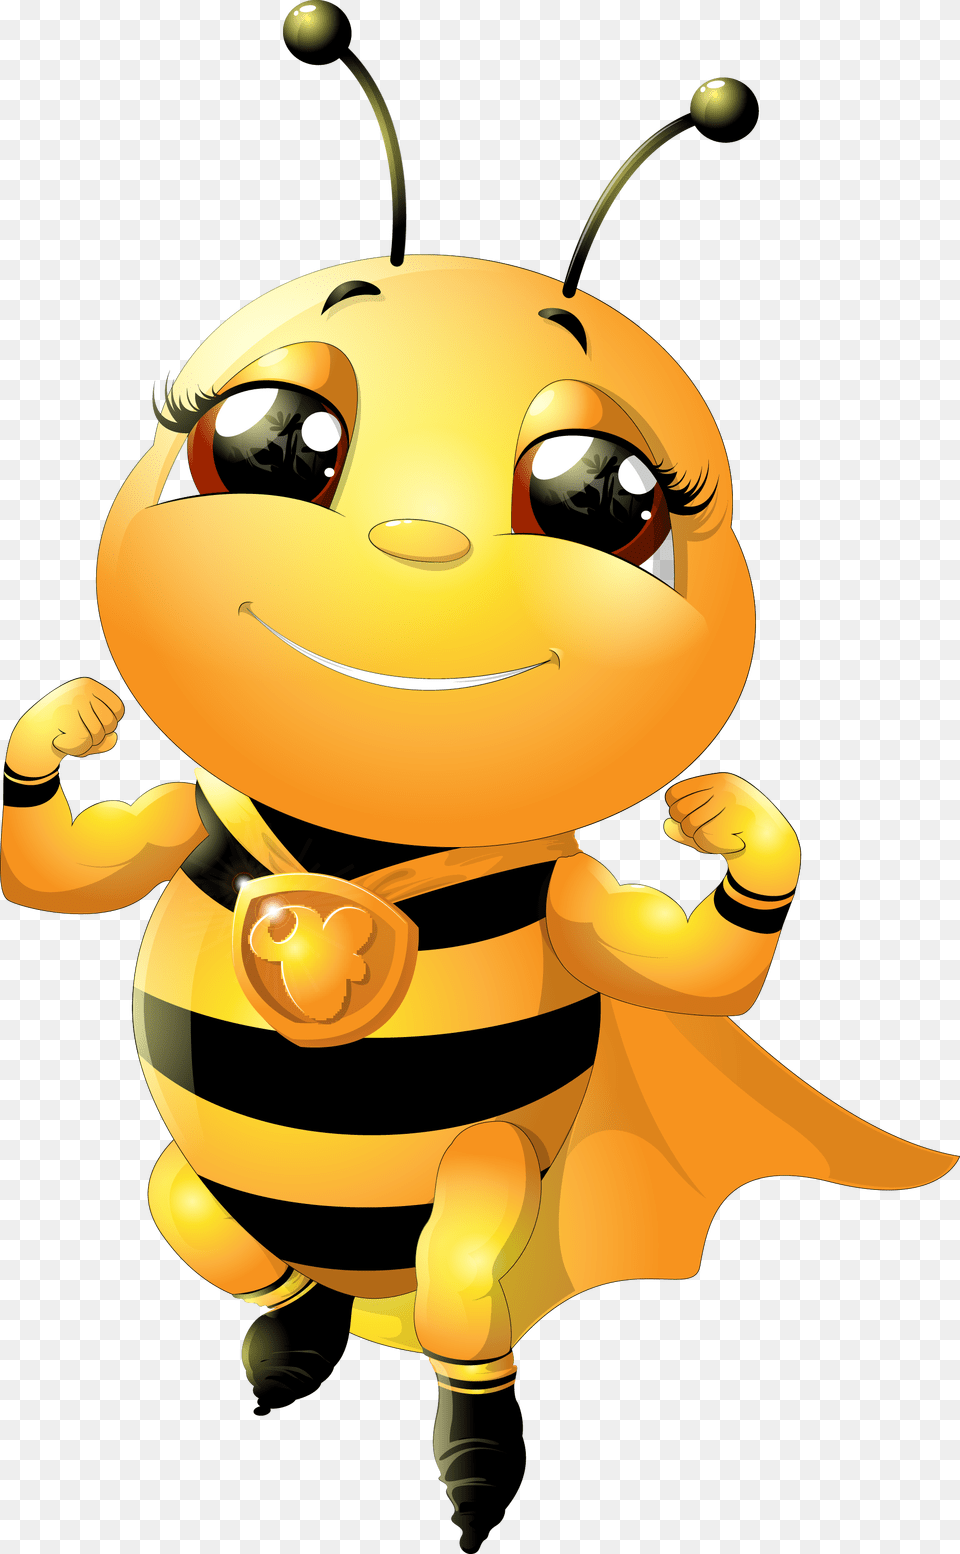 Cartoon Bumble Bee Eyes, Animal, Honey Bee, Insect, Invertebrate Png